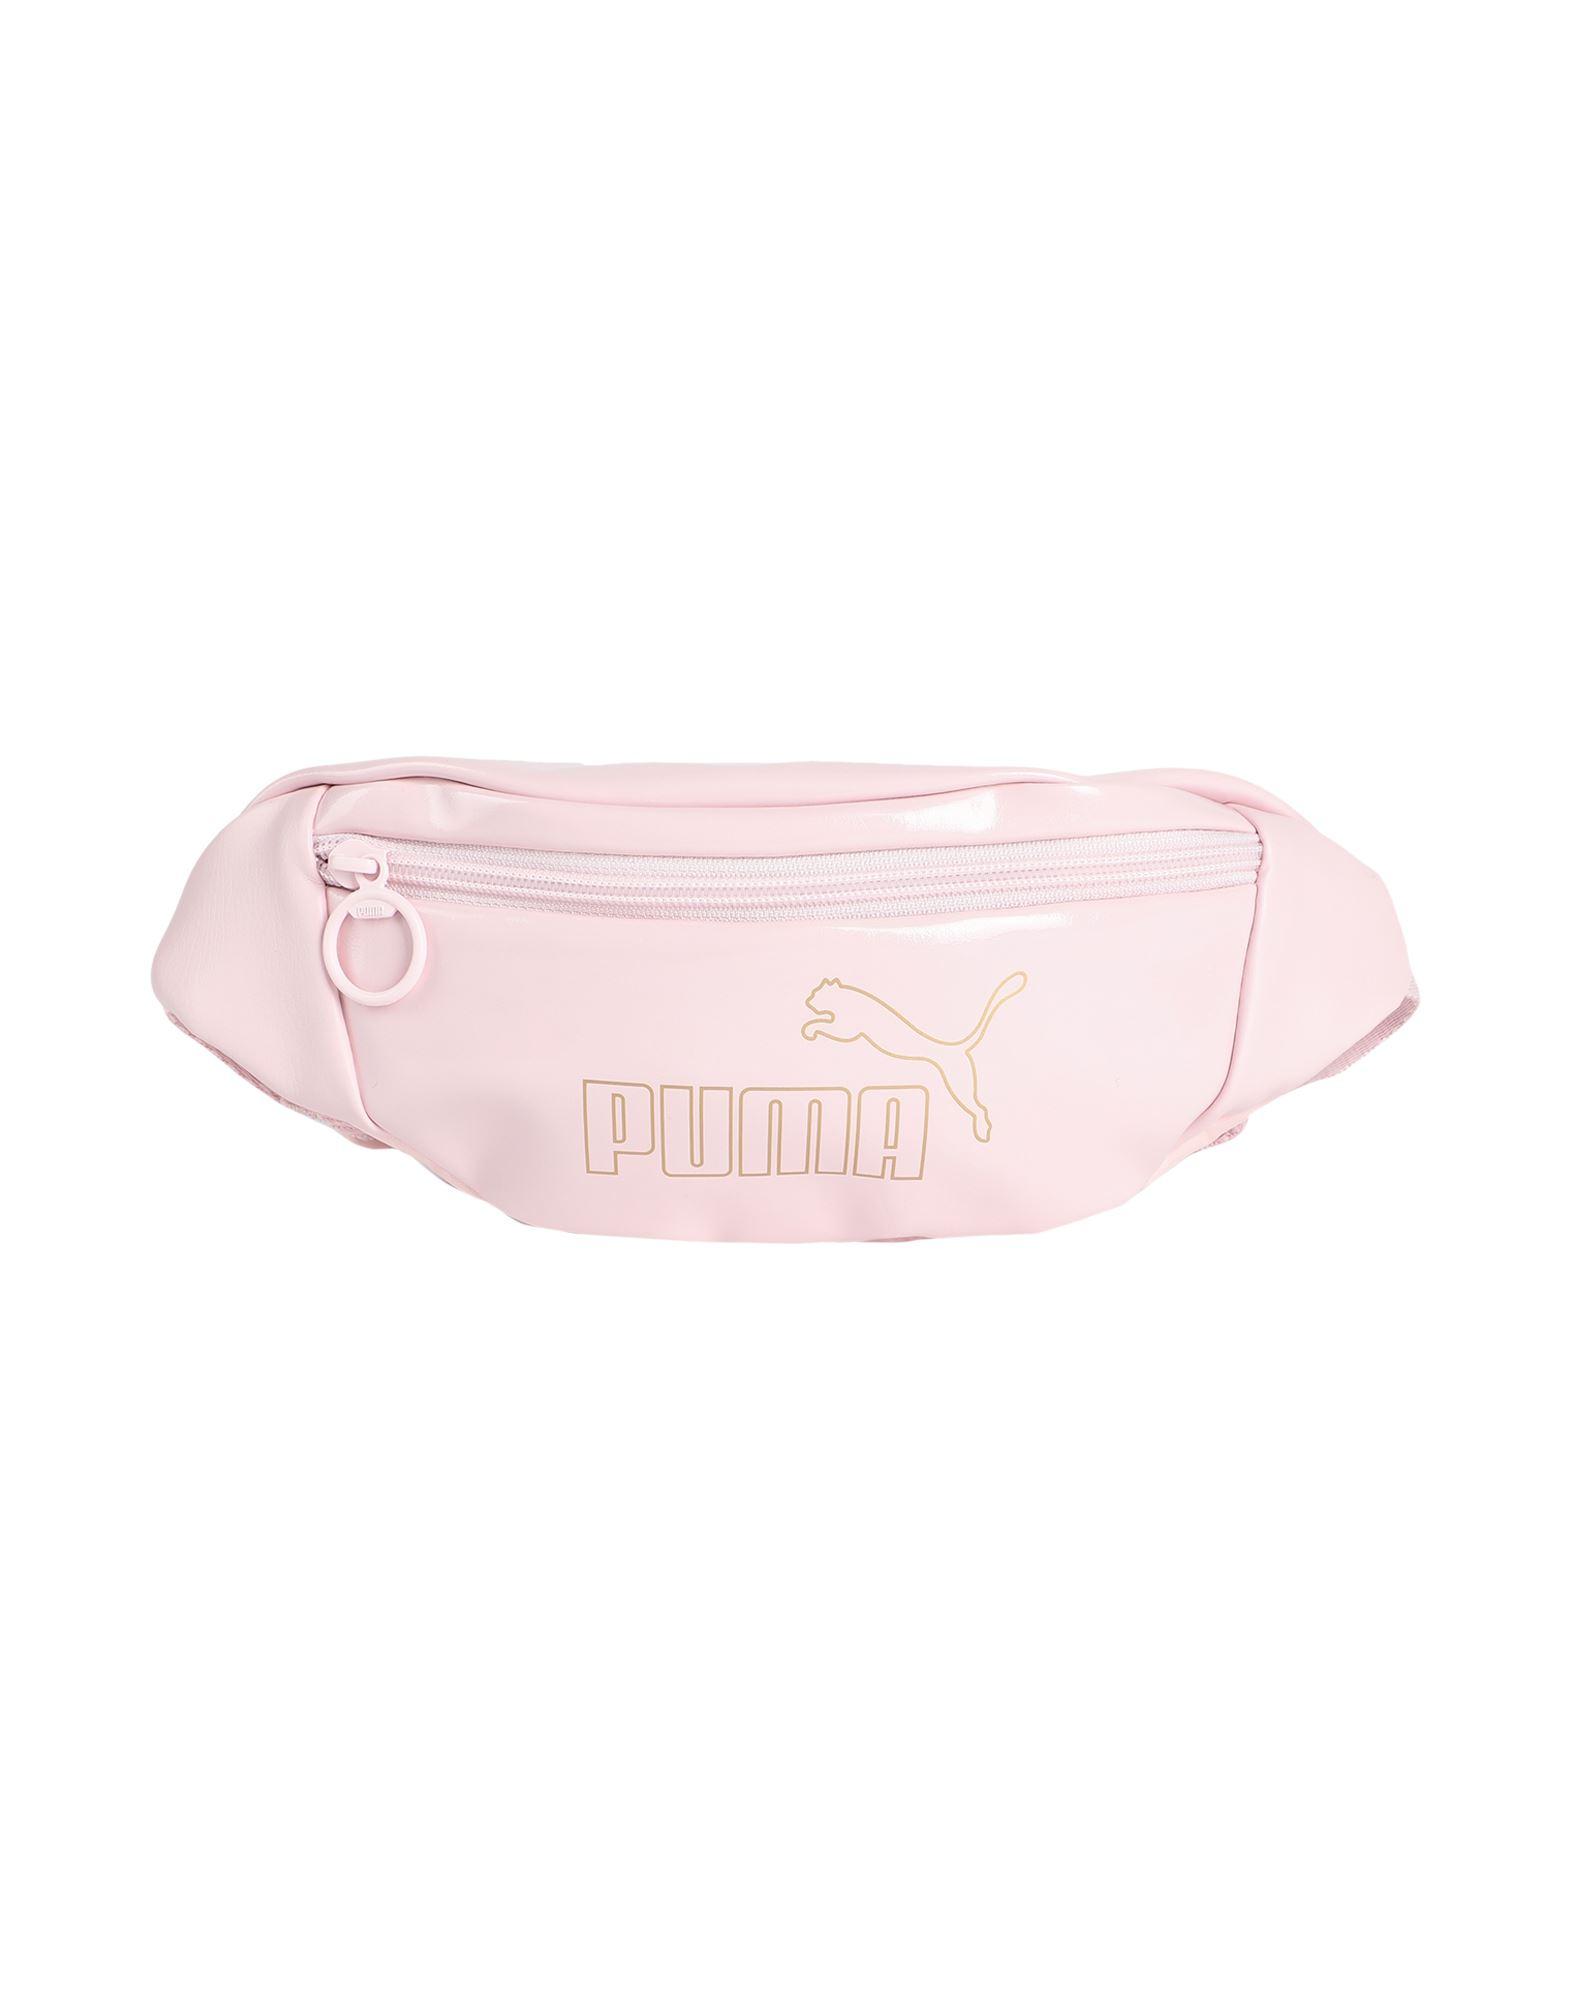 PUMA Synthetic Bum Bag in Pink - Lyst